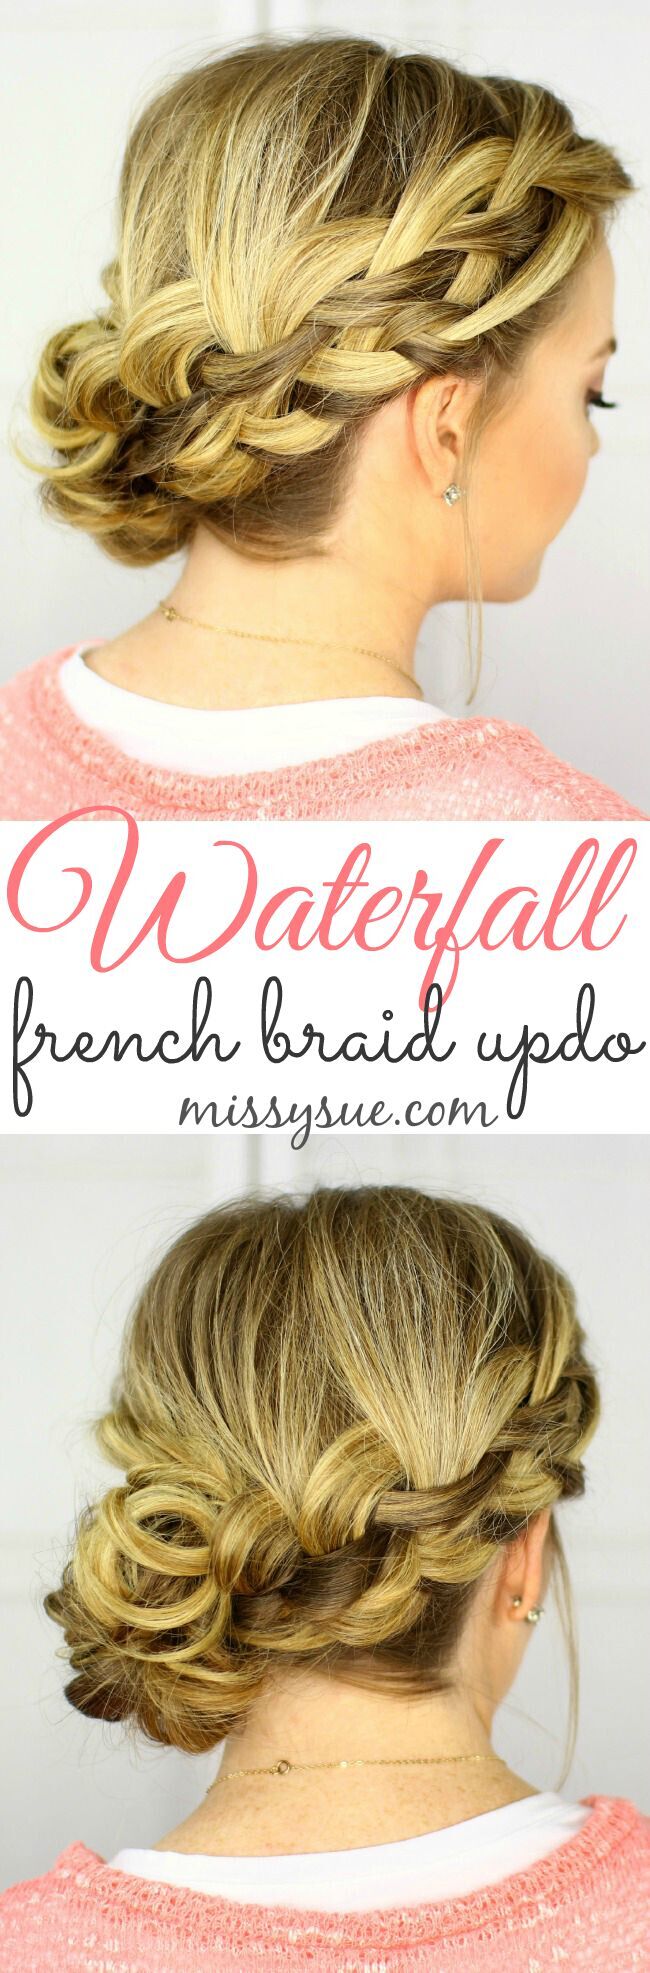 21 All New French Braid Updo Hairstyles PoPular Haircuts